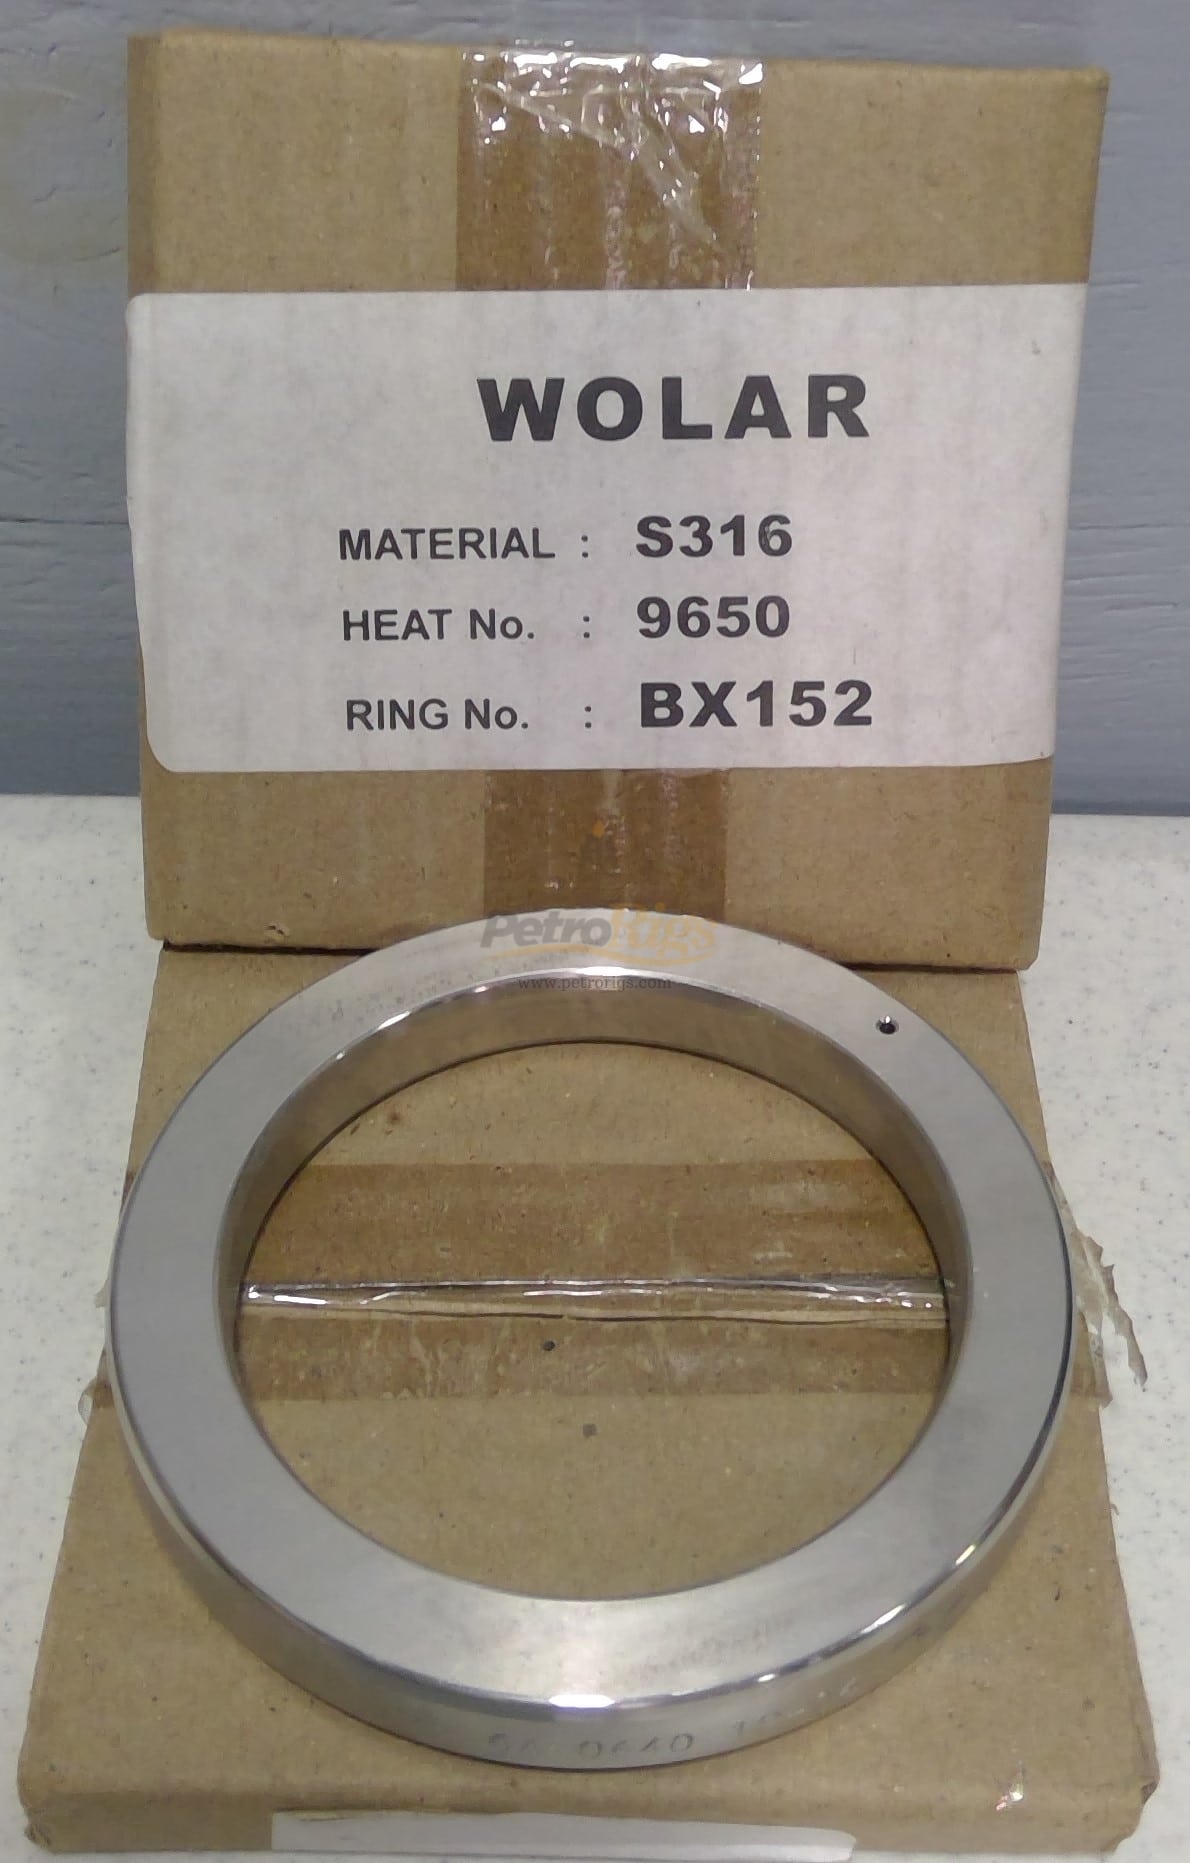 METAL RING JOINT GASKETS